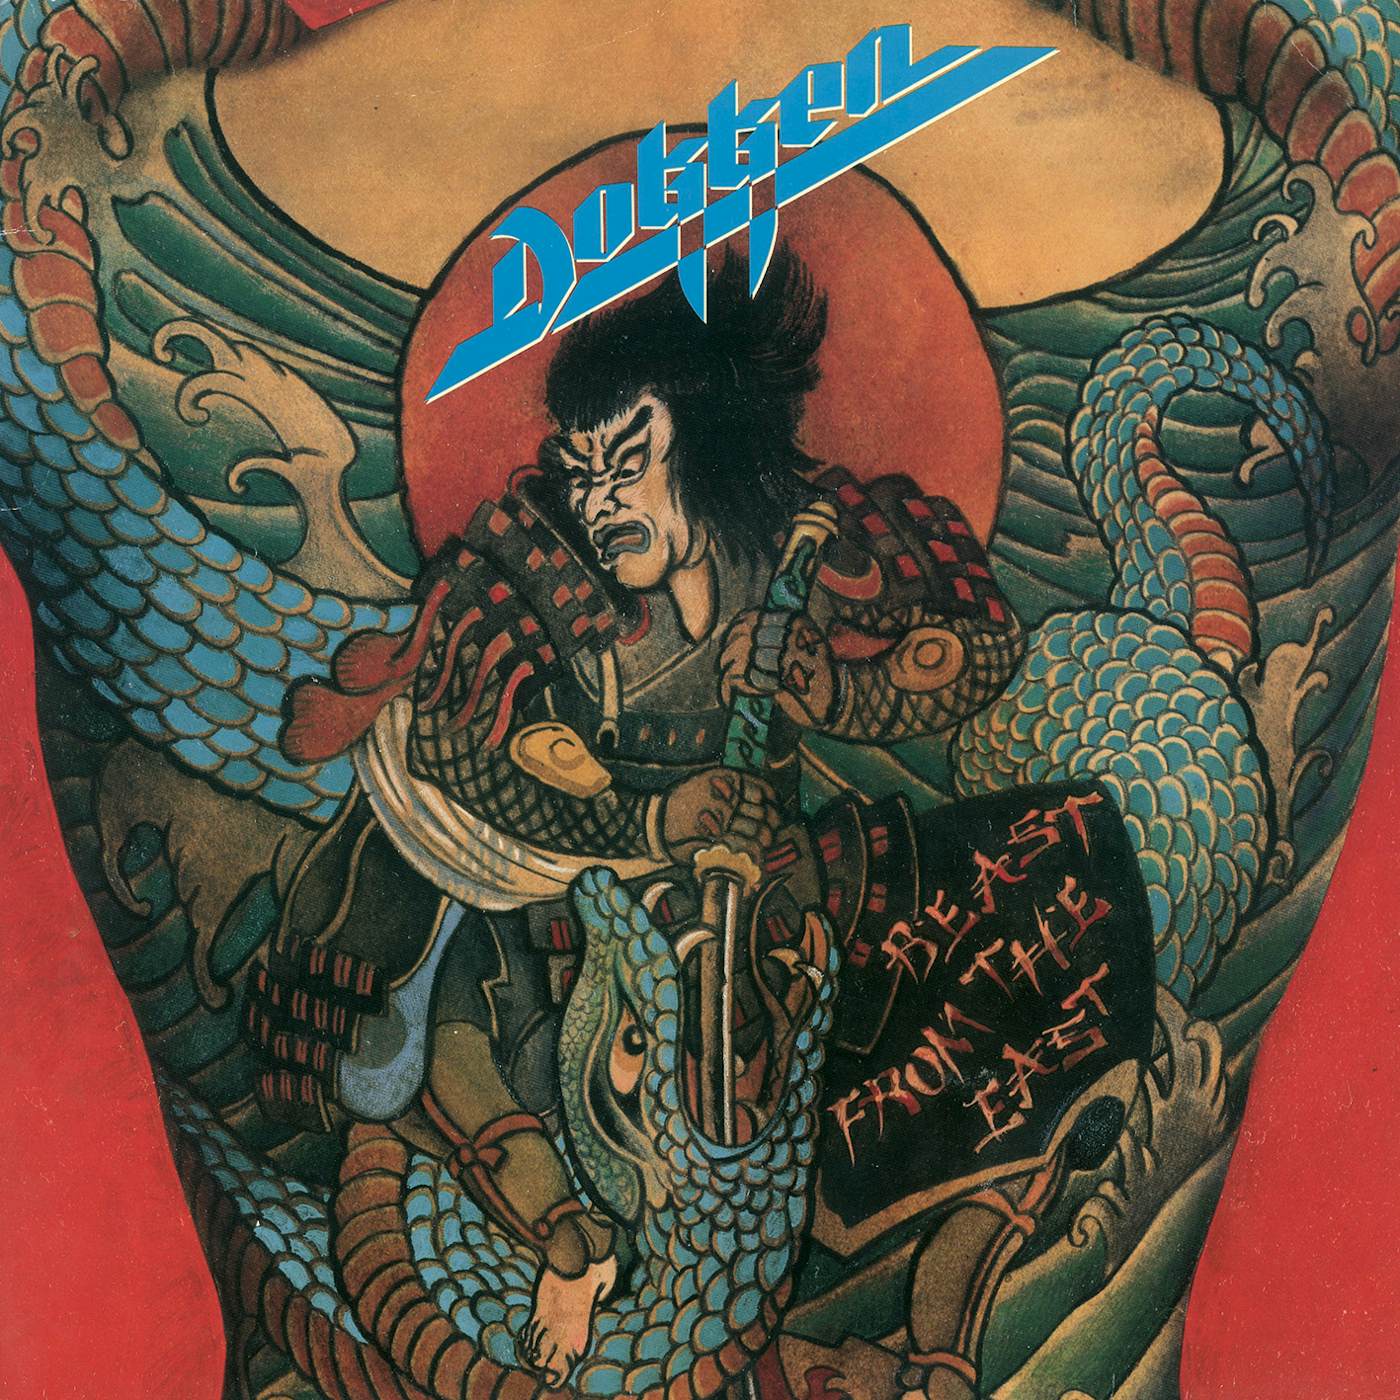 Dokken BEAST FROM THE EAST CD